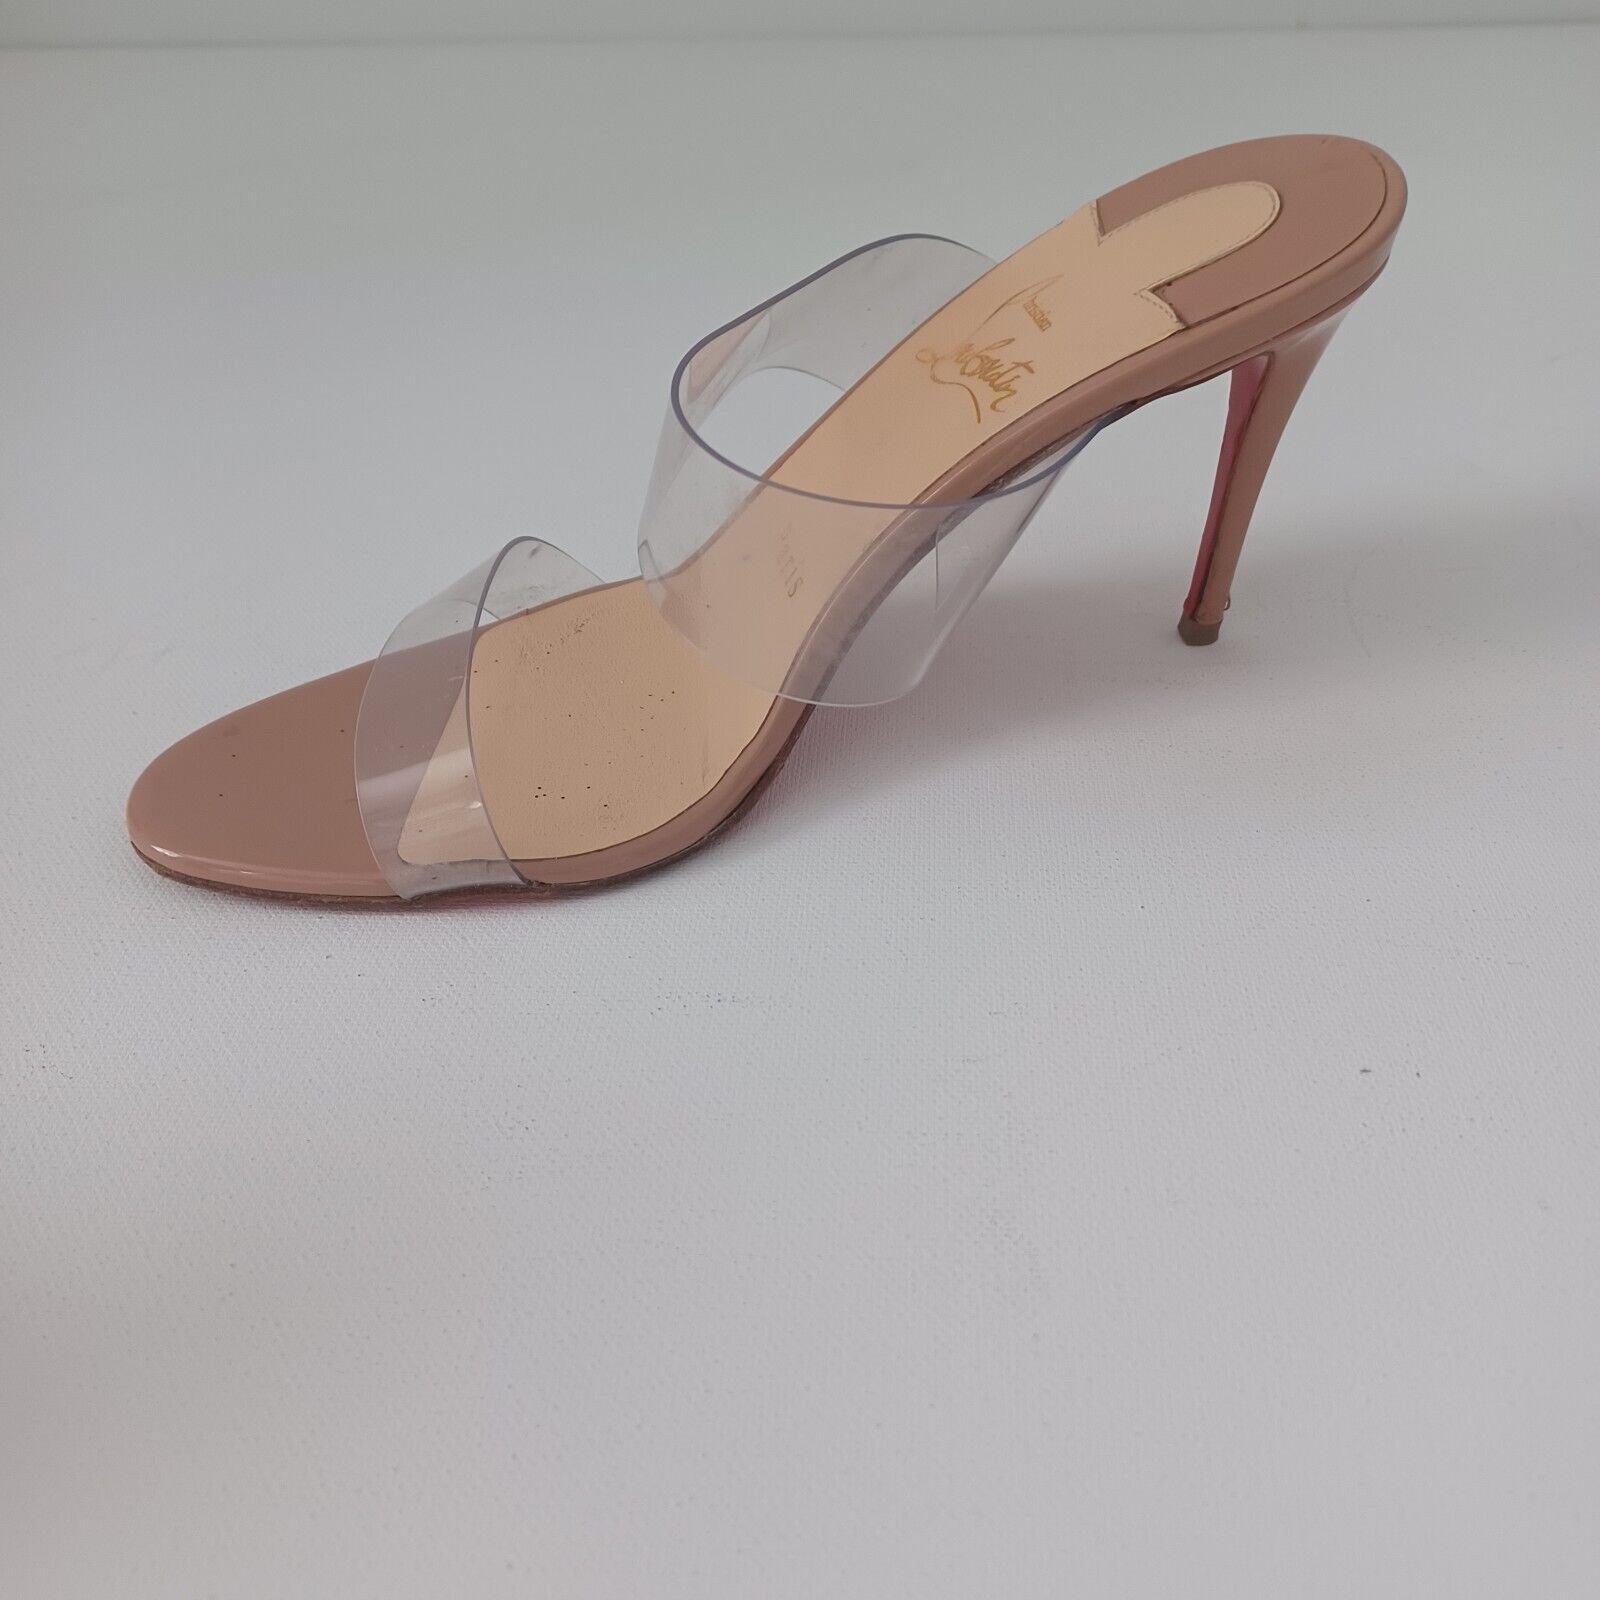 CHRISTIAN LOUBOUTIN Just Nothing Mule Heeled Sandals PVC and Nude Patent 36.5